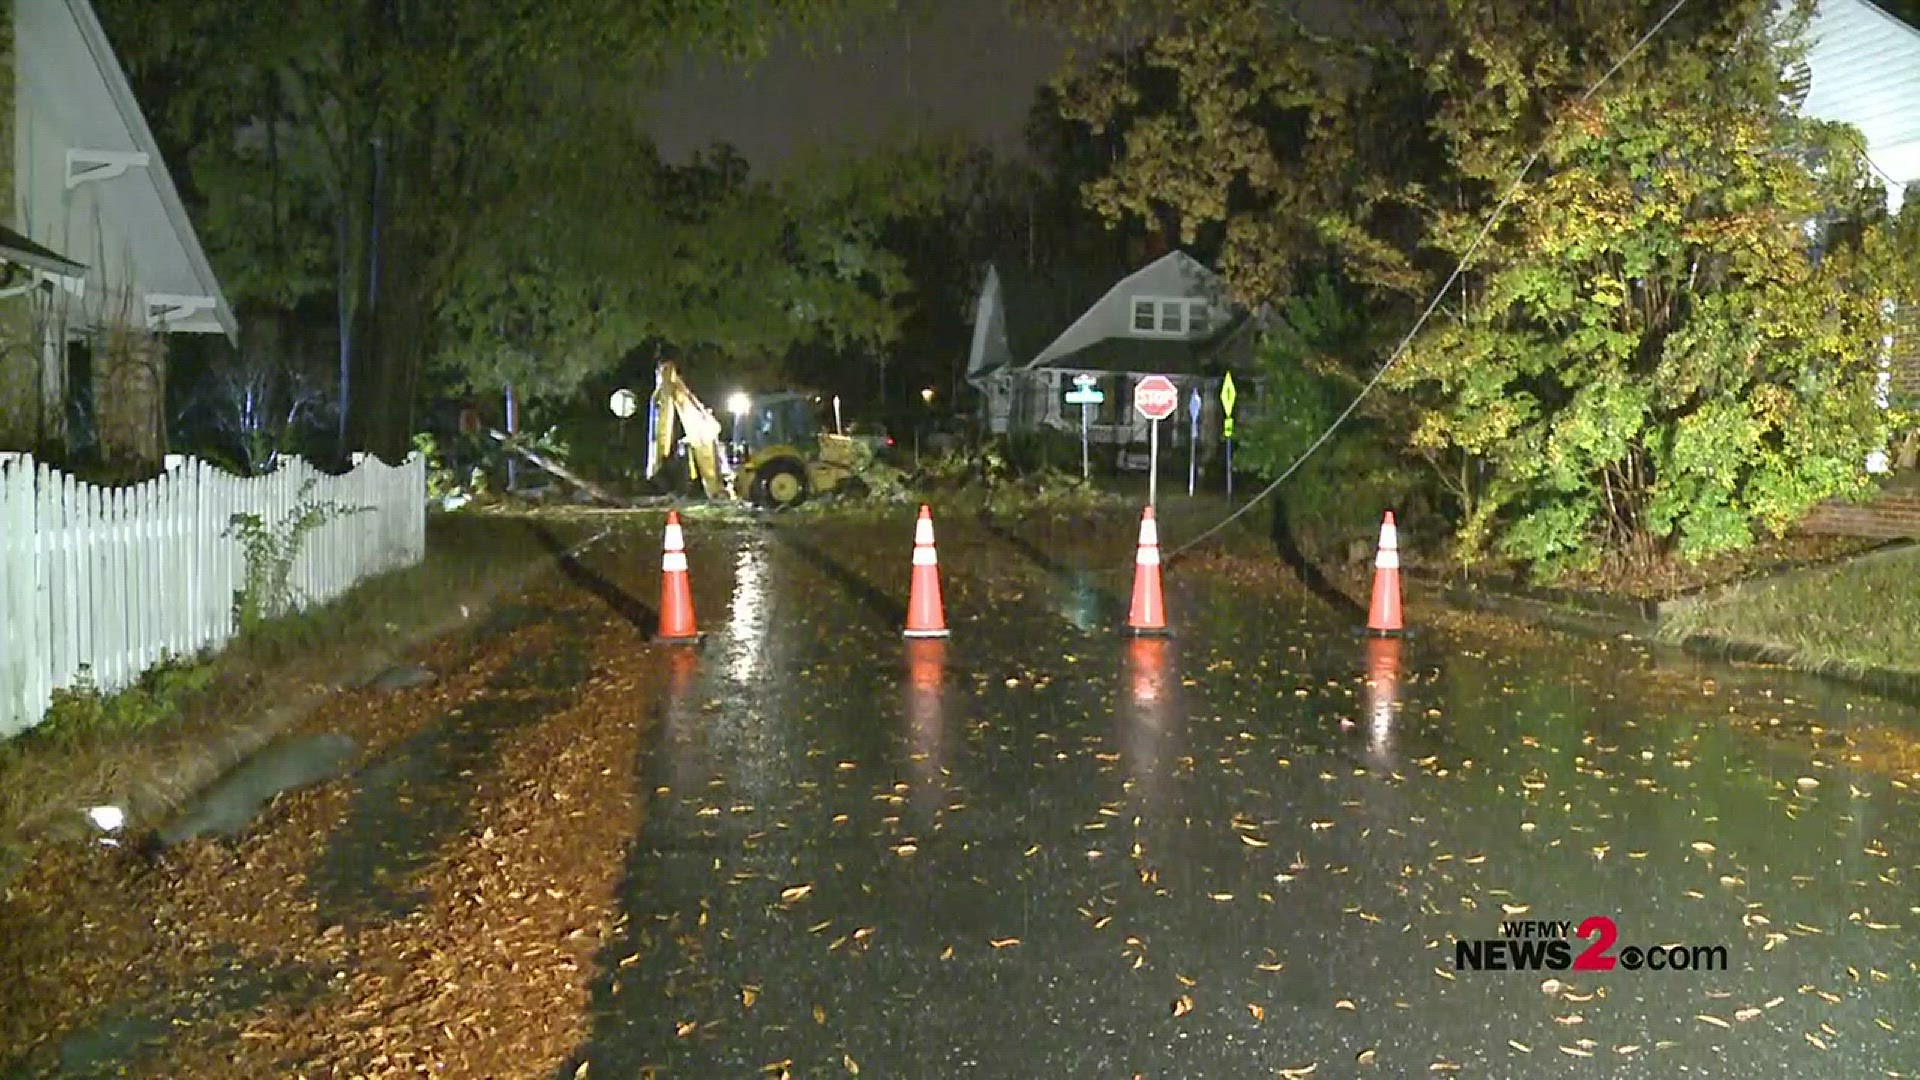 North Eugene Street is closed in Greensboro between Florence and Victoria Street due to a downed tree and lines. Duke Energy is aware of the downed line and is currently working on the problem.